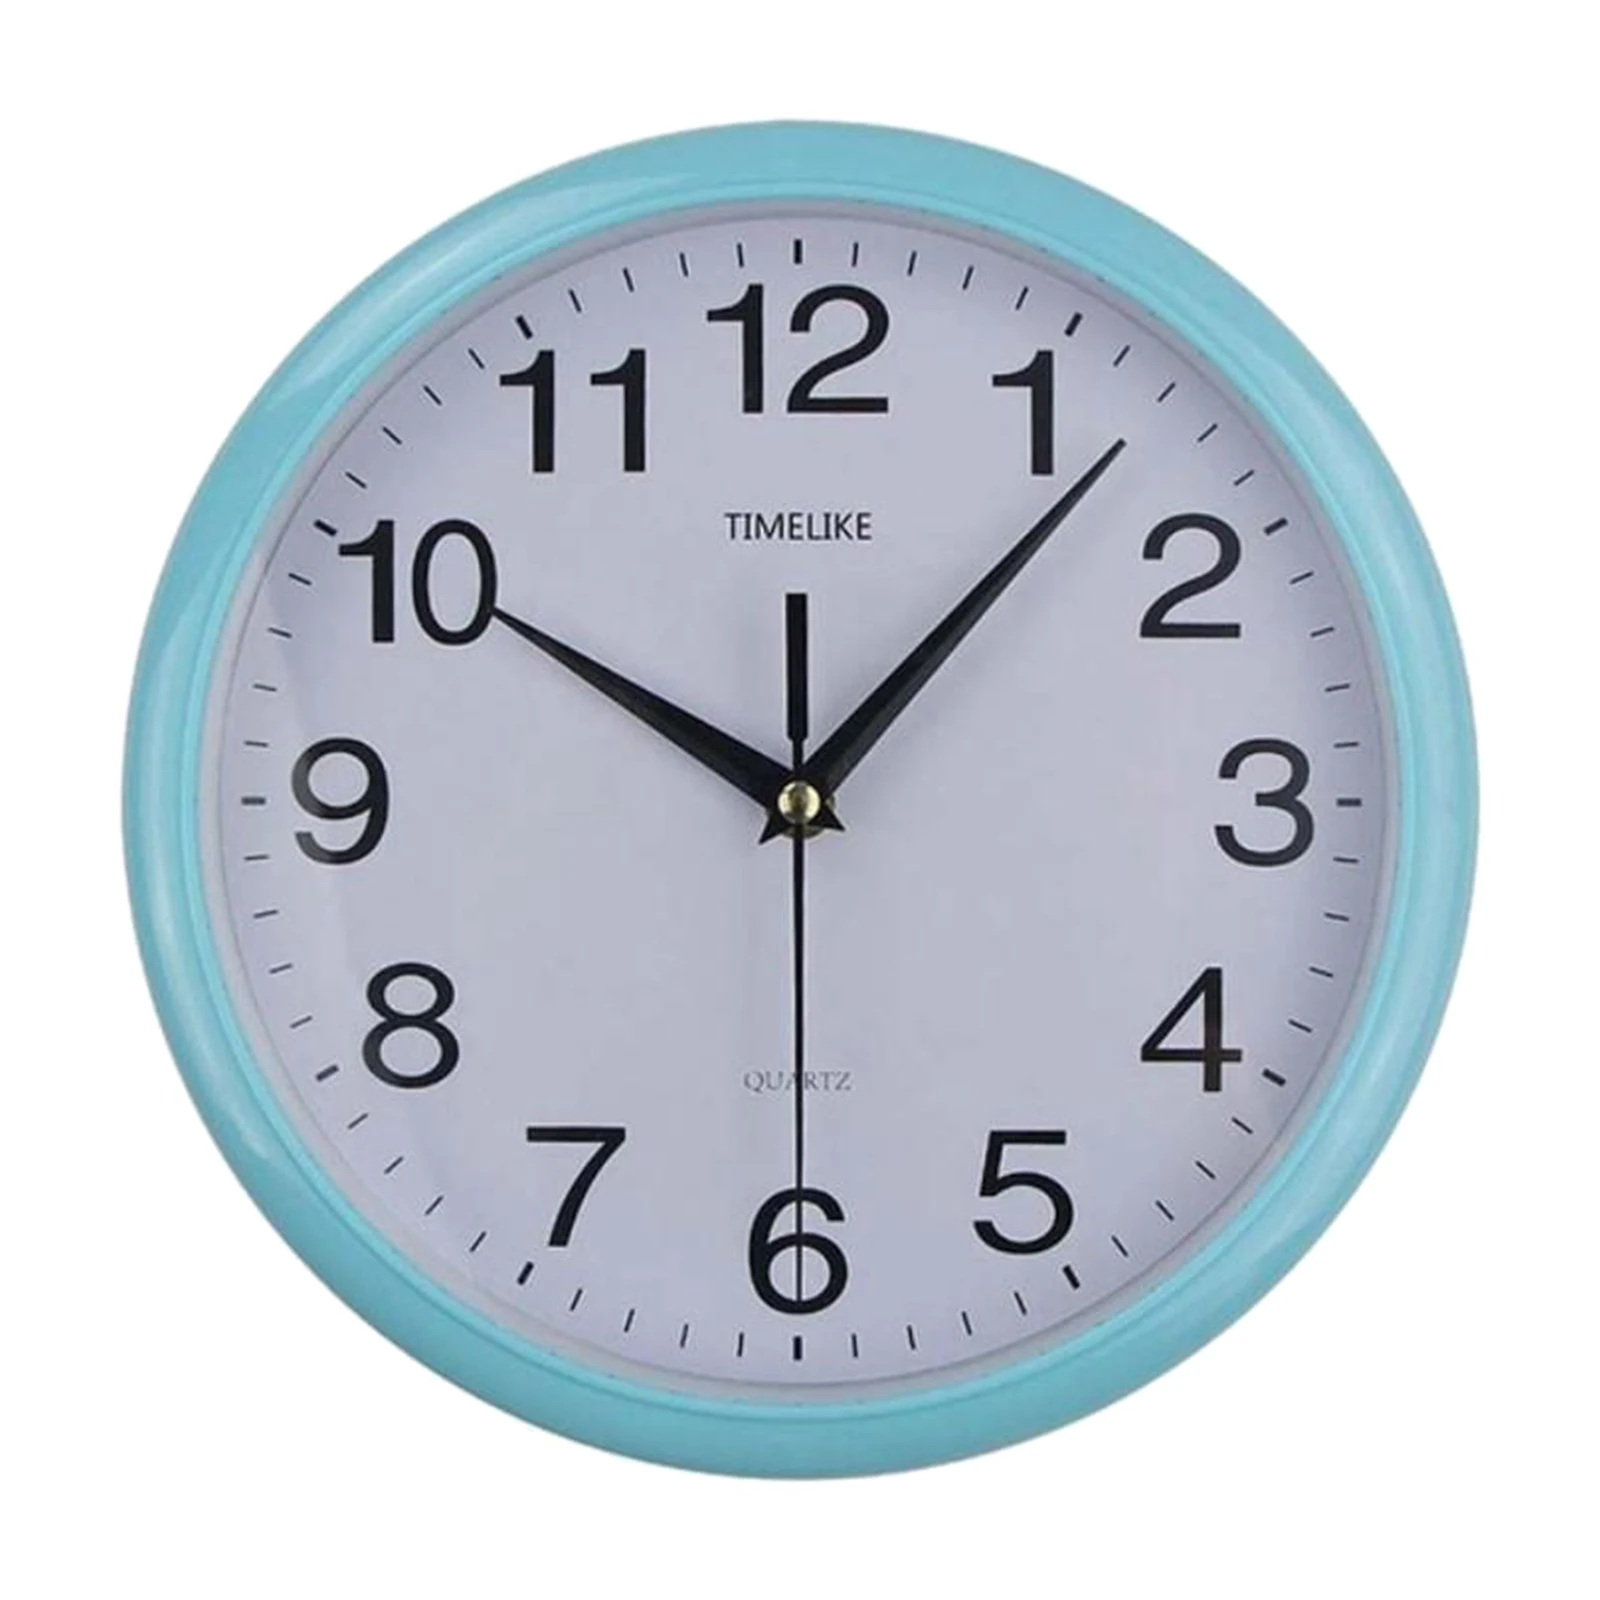 Modern Wall Clock Watches Silent Non Ticking Home Living Room Office Non Ticking Quilty Quartz